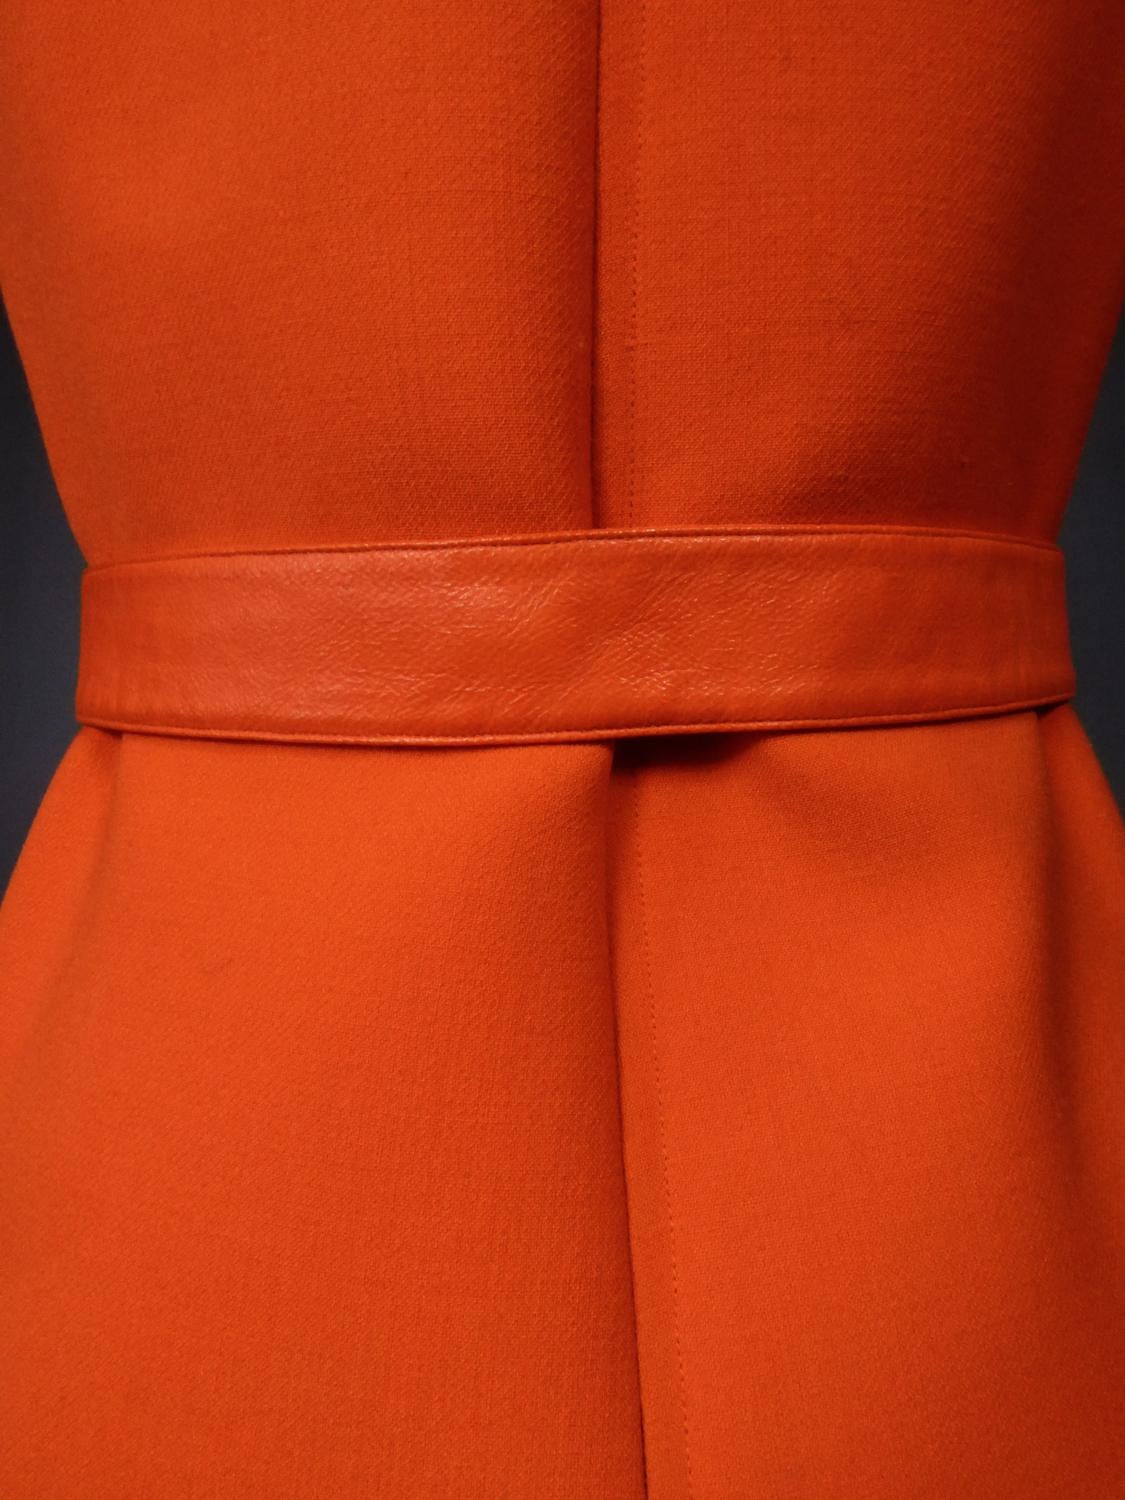 A French André Courrèges Couture Future Dress numbered 0045426 Circa 1970/1972 For Sale 7